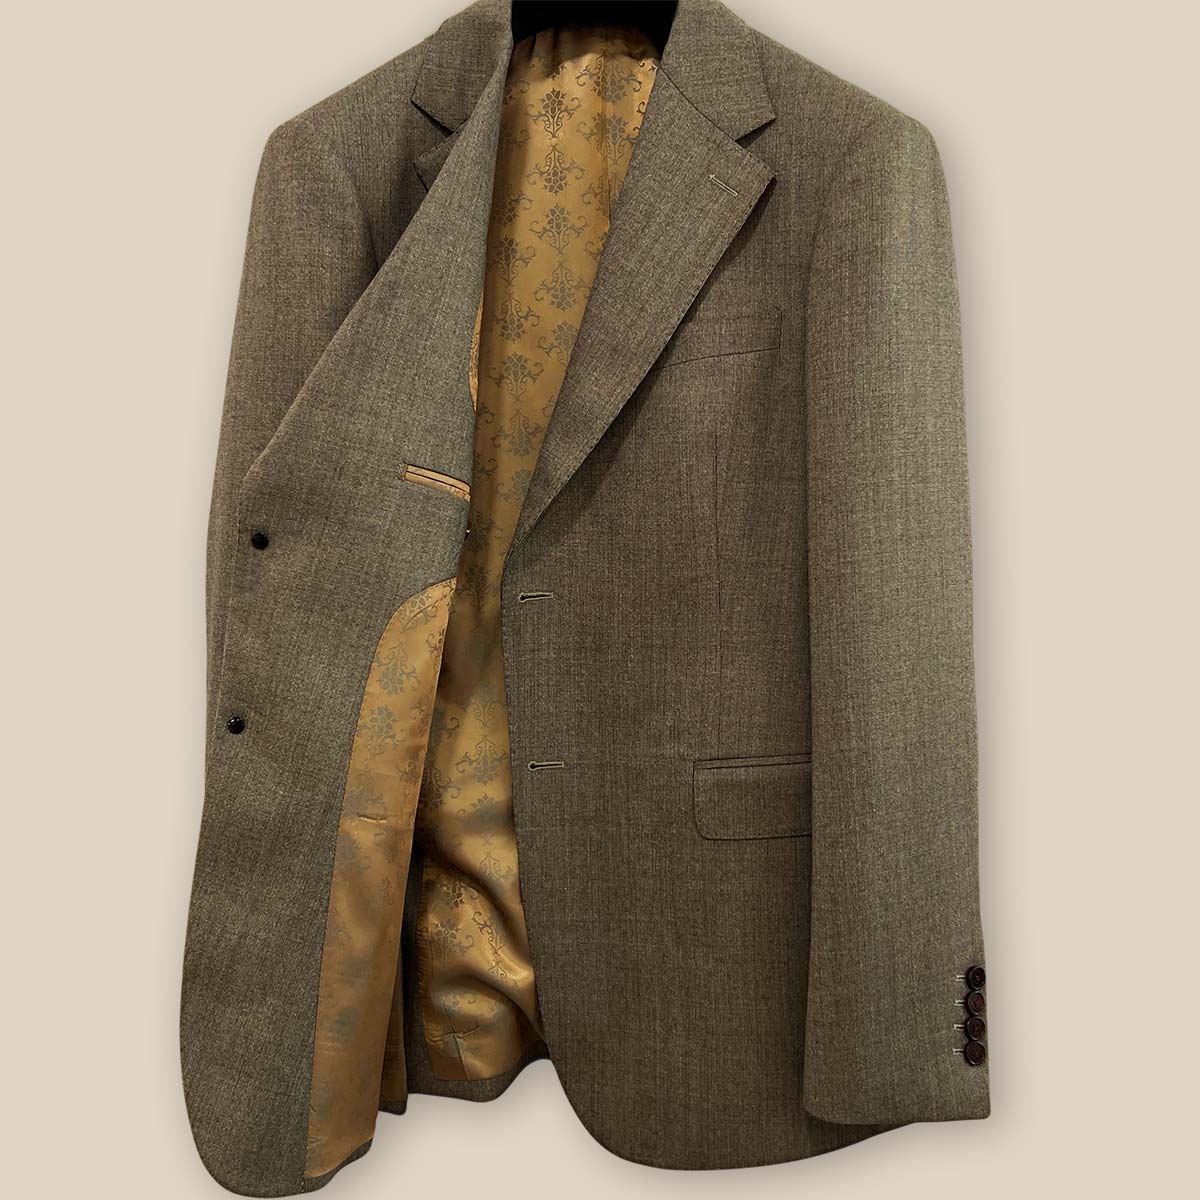 Inside view of the right side of the Westwood Hart brown nailhead men's suit jacket, featuring the gold patterned lining and pocket details.